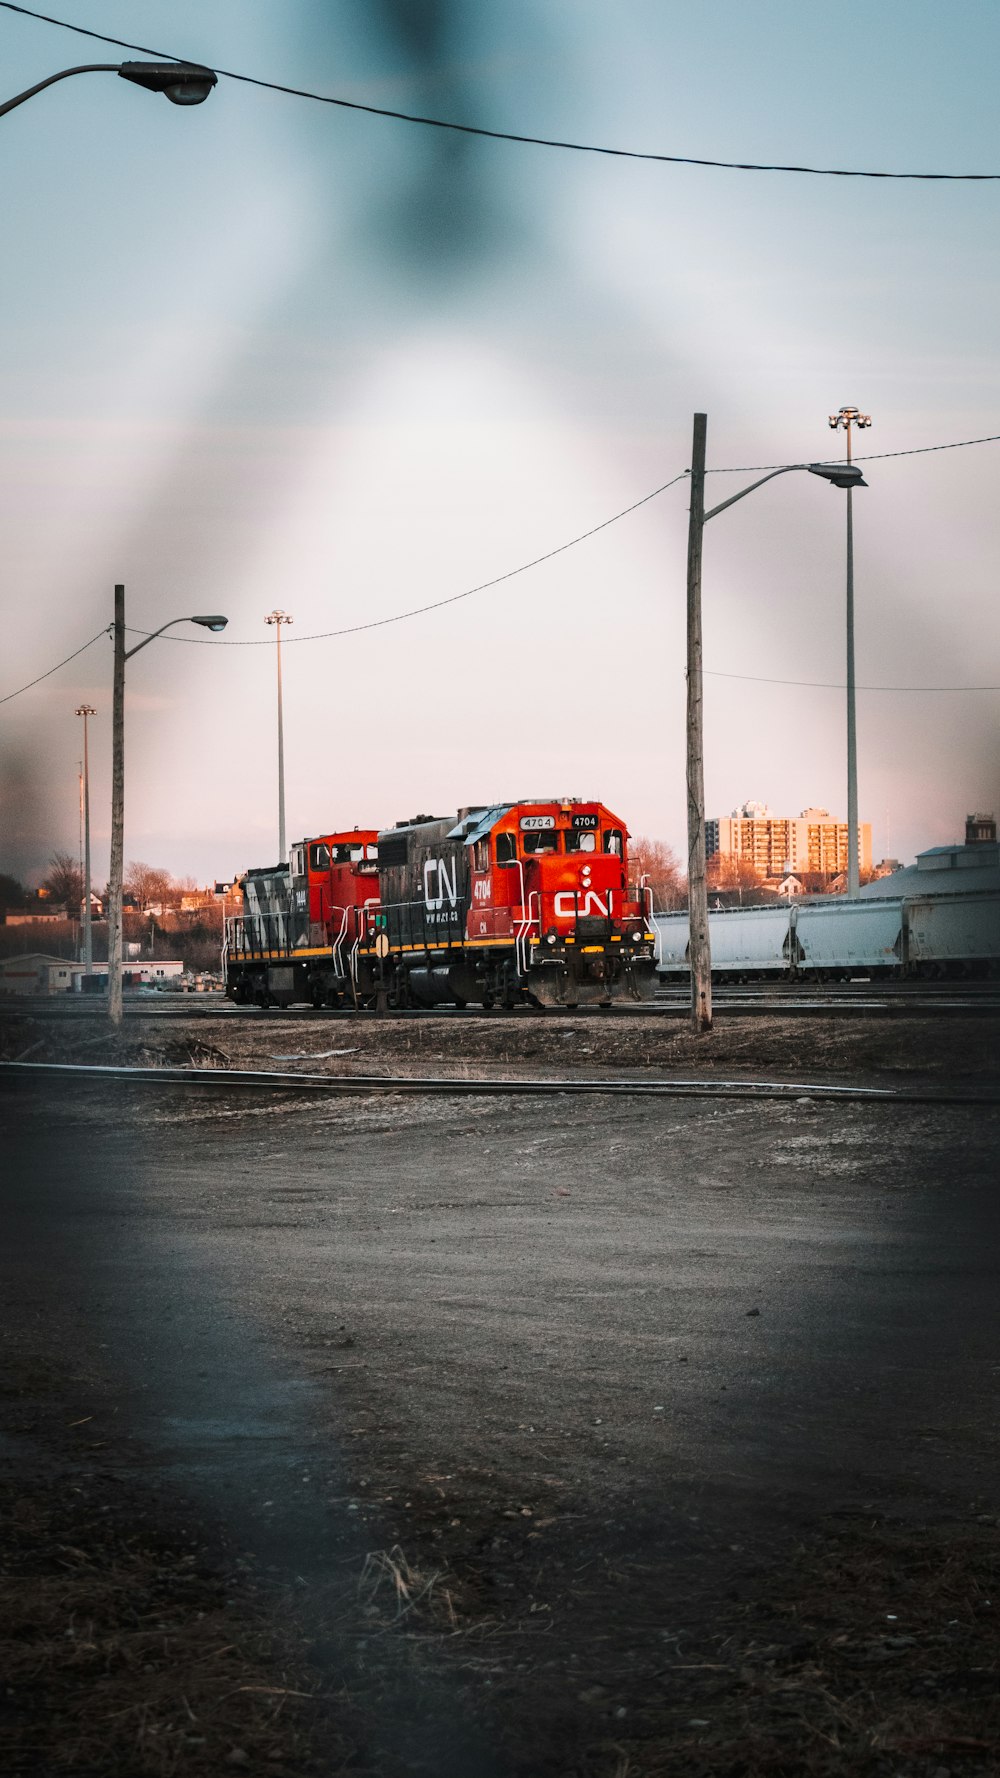 red train